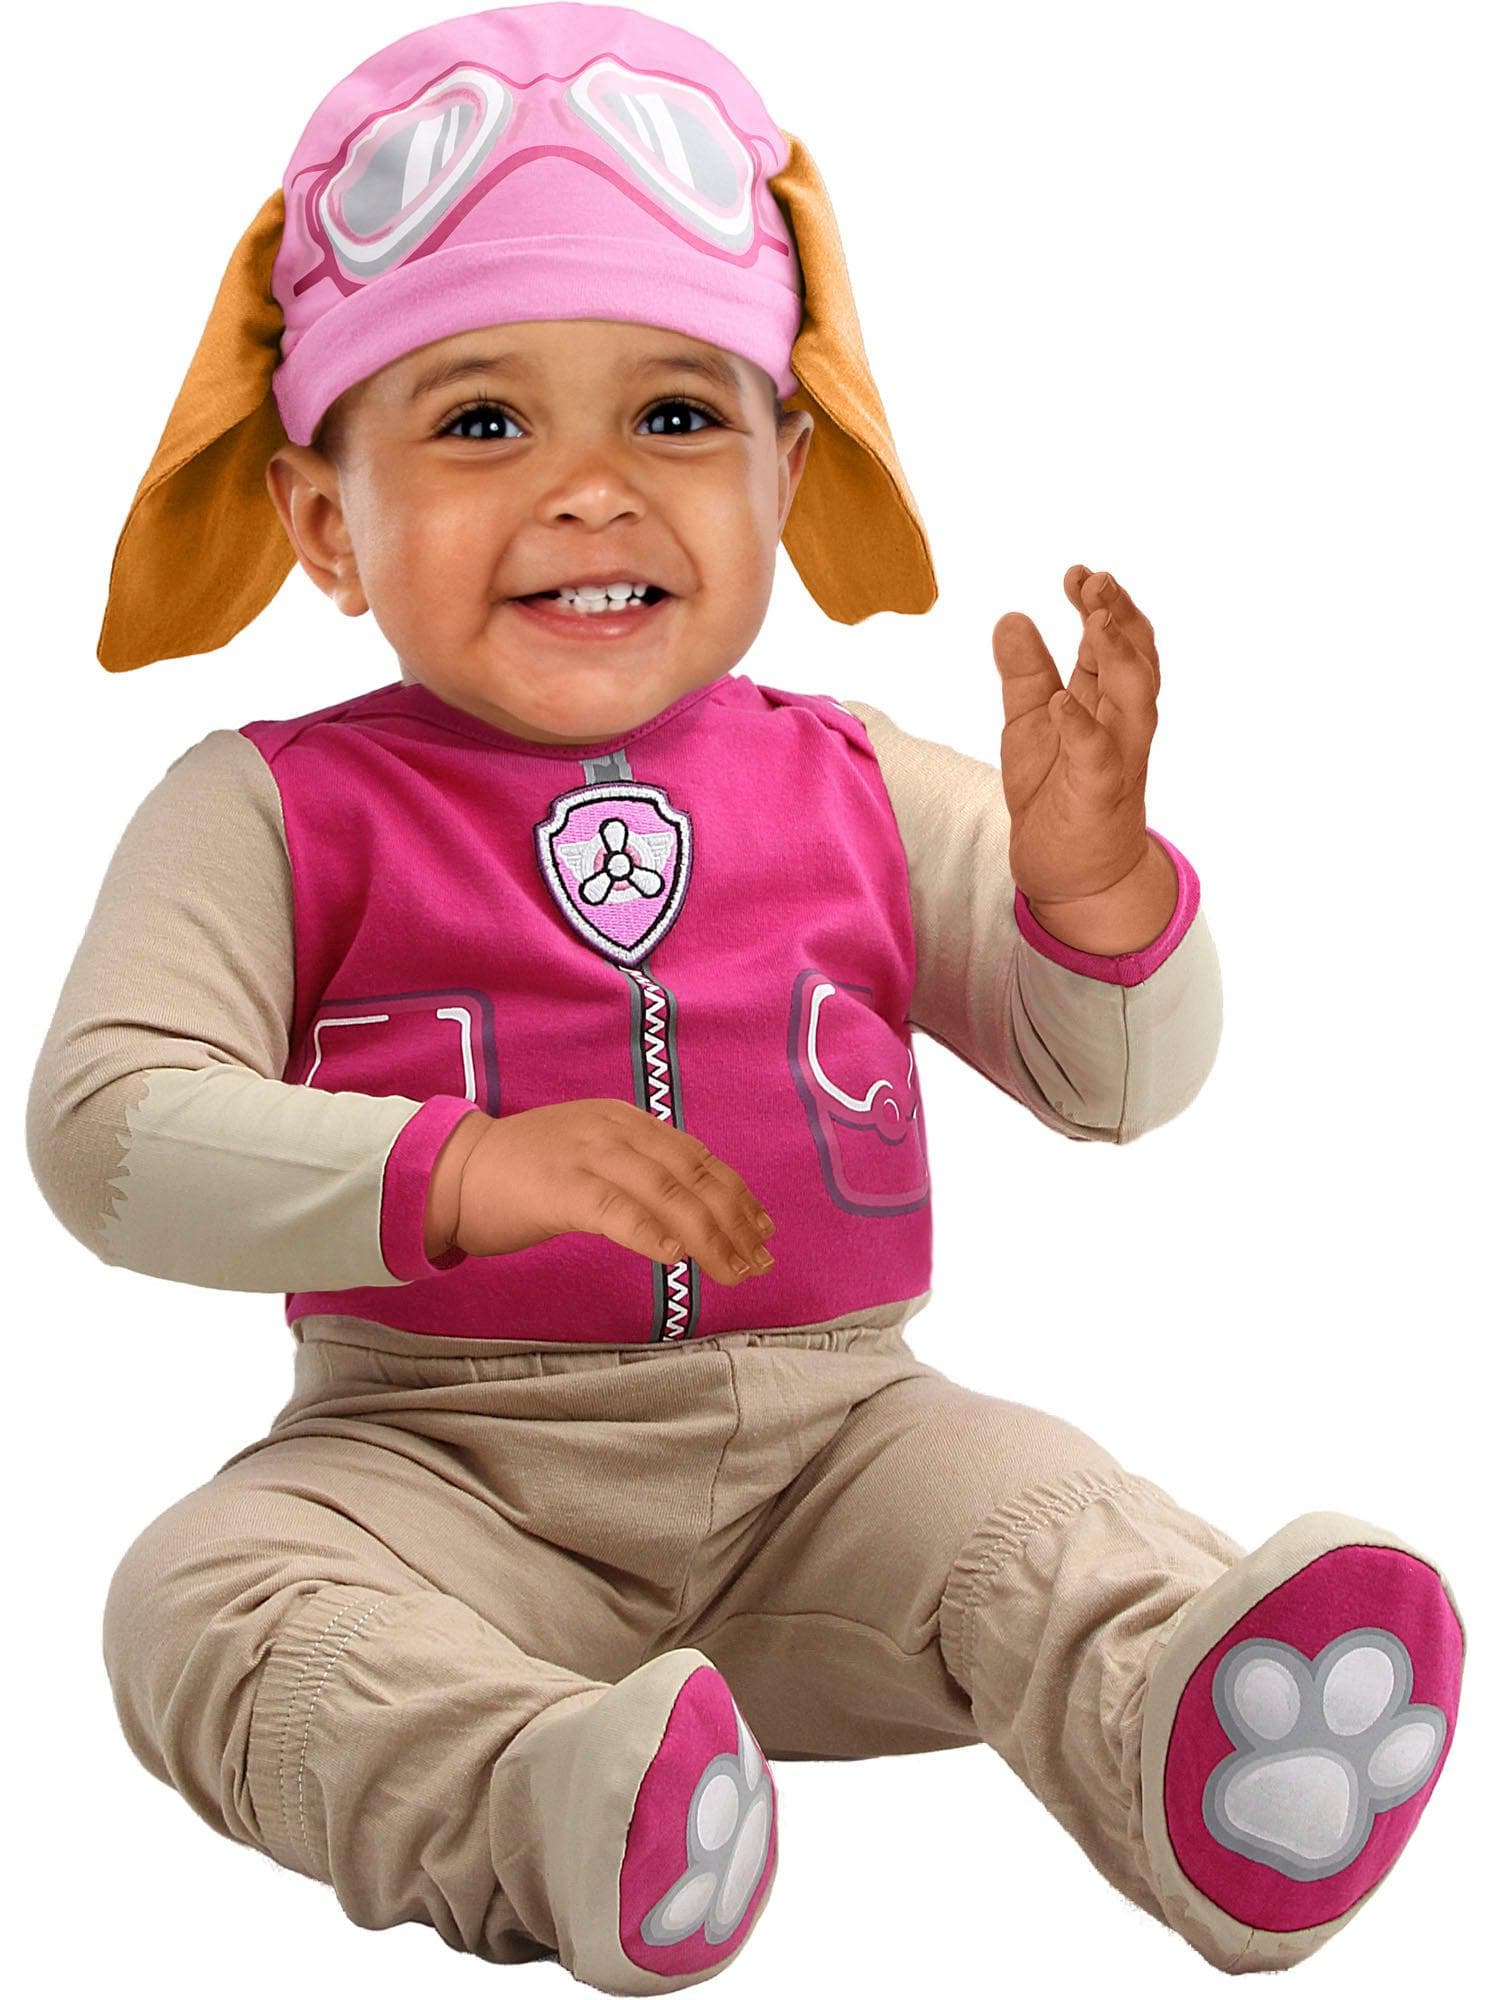 Paw Patrol Chase Skye Romper and Hat for Babies and Toddlers - costumes.com